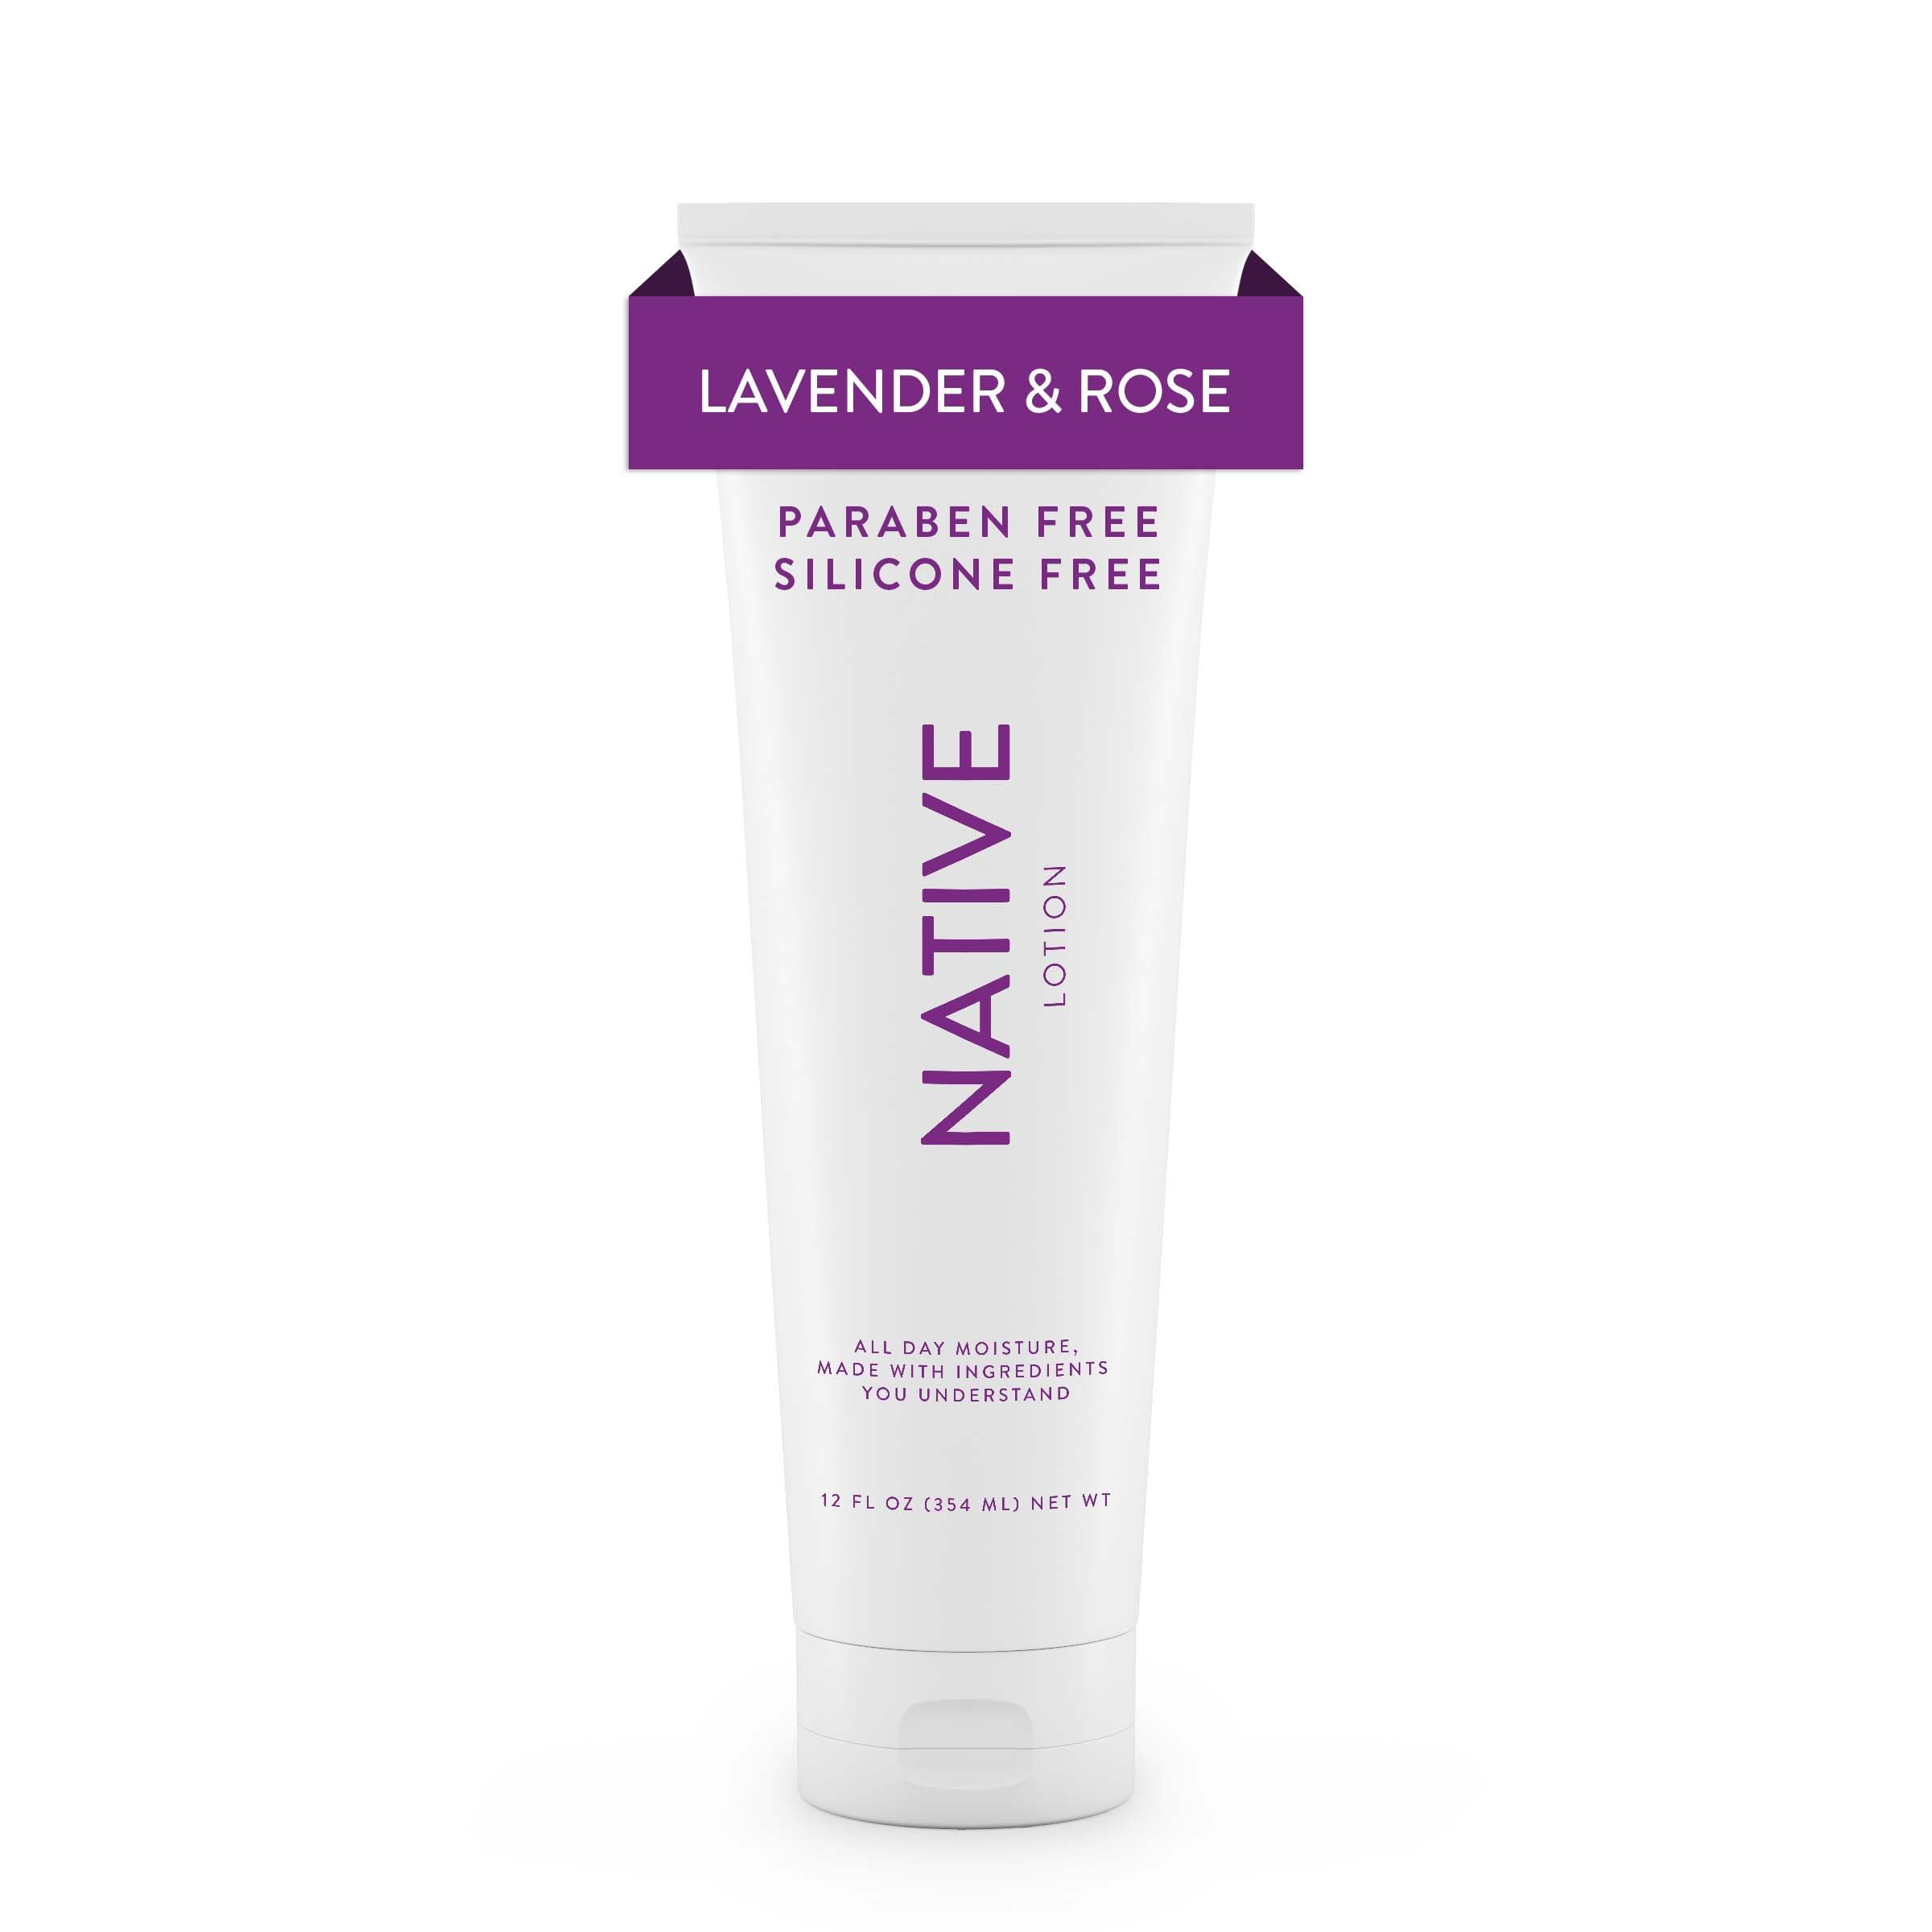 Native Natural Hand and Body Lotion, Lavender & Rose, Paraben Free, Silicone Free 12 oz